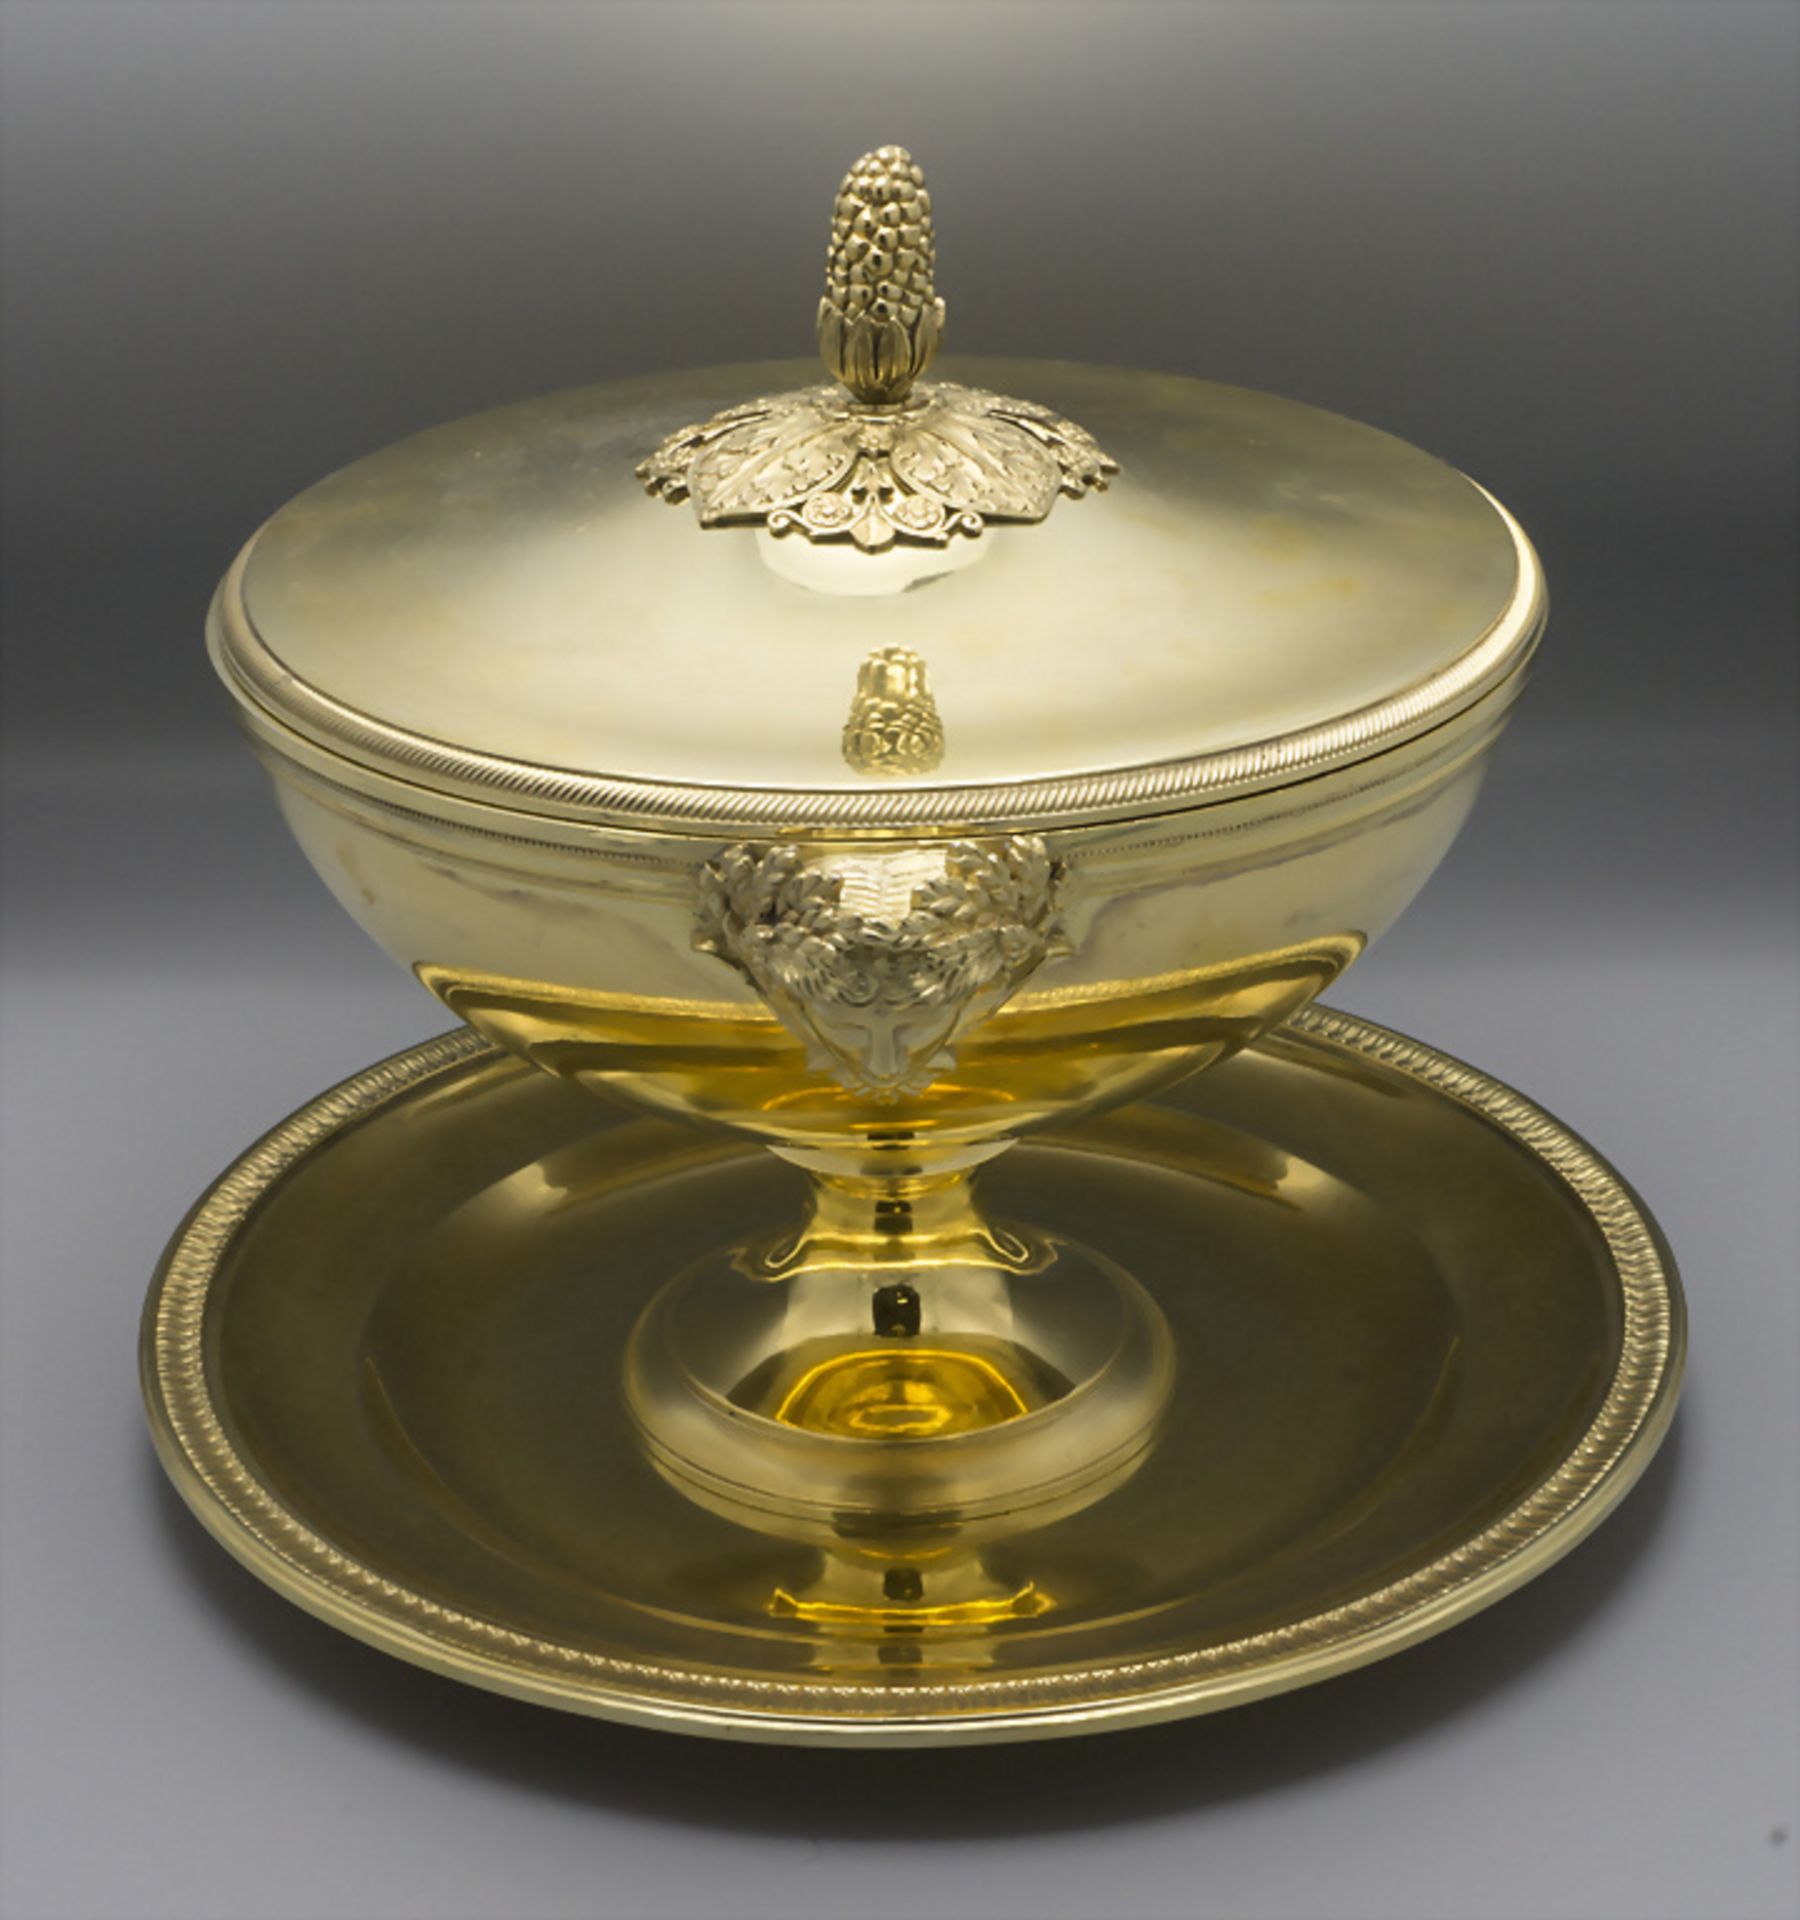 Deckelterrine auf Presentoire / A tureen with cover and plate, Emile Puiforcat, Paris, nach 1857 - Image 2 of 14